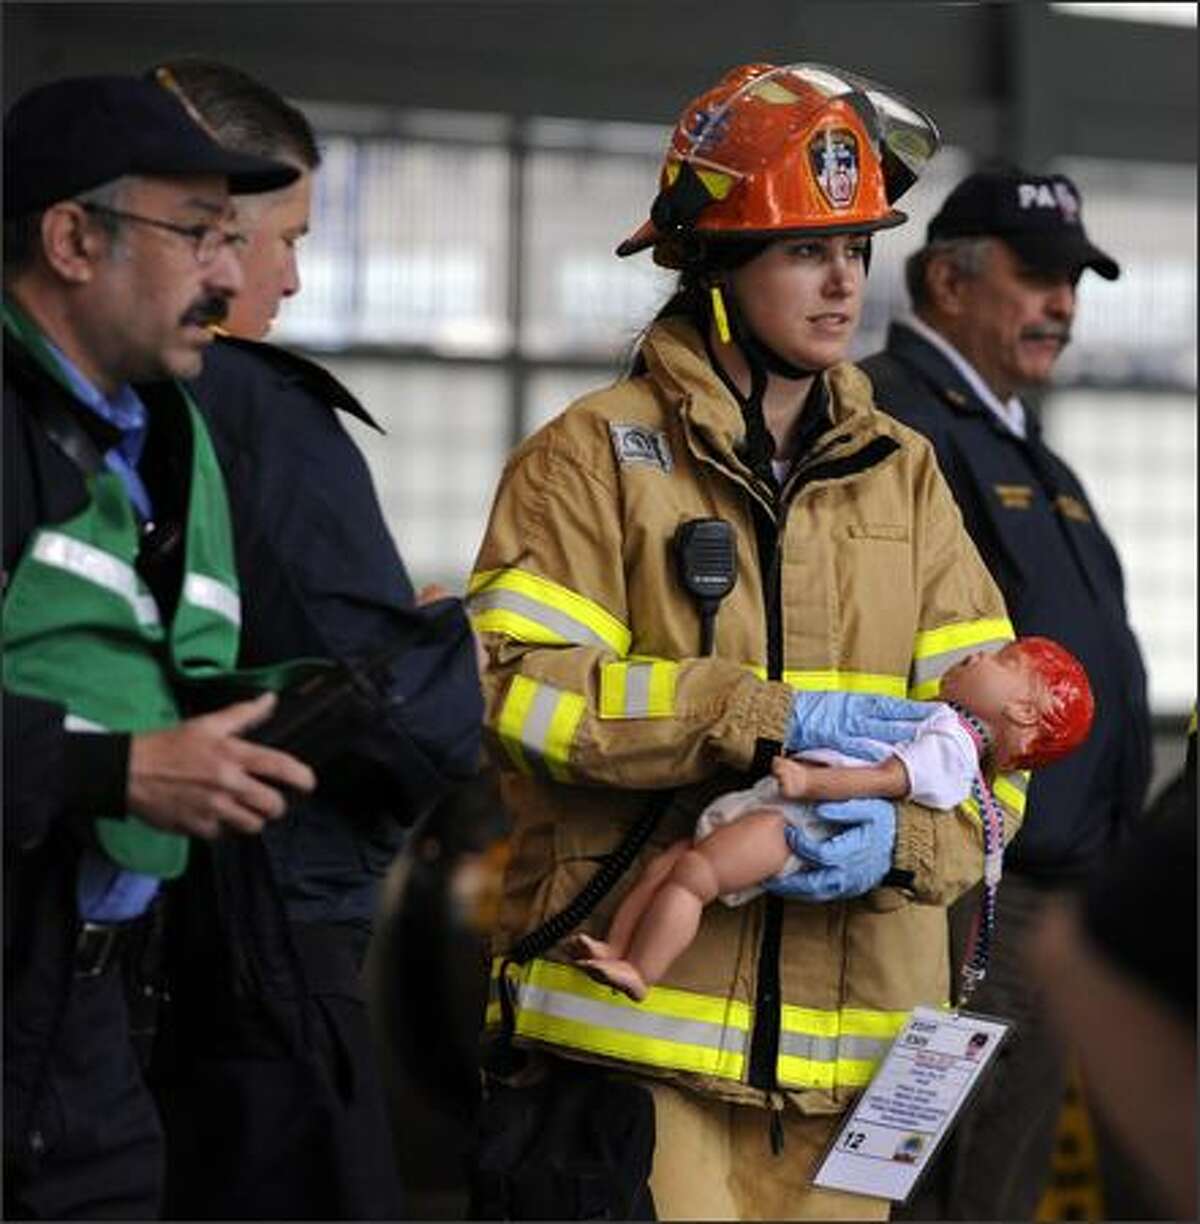 A New York City Fire Department EMS worker carries a dummy baby victim during Operation Safe PATH 2009 Sunday at the PATH station at the World Trade Center. Hundreds of firefighters and police swarmed Ground Zero Sunday, the site where the World Trade Center once stood, in the largest security exercise here since the Sept. 11, 2001 attacks. As part of an elaborate dress rehearsal for a possible future terror strike, rescue workers exploded simulated bombs in a commuter train tunnel linking Manhattan to New Jersey burrowed beneath the Hudson River.